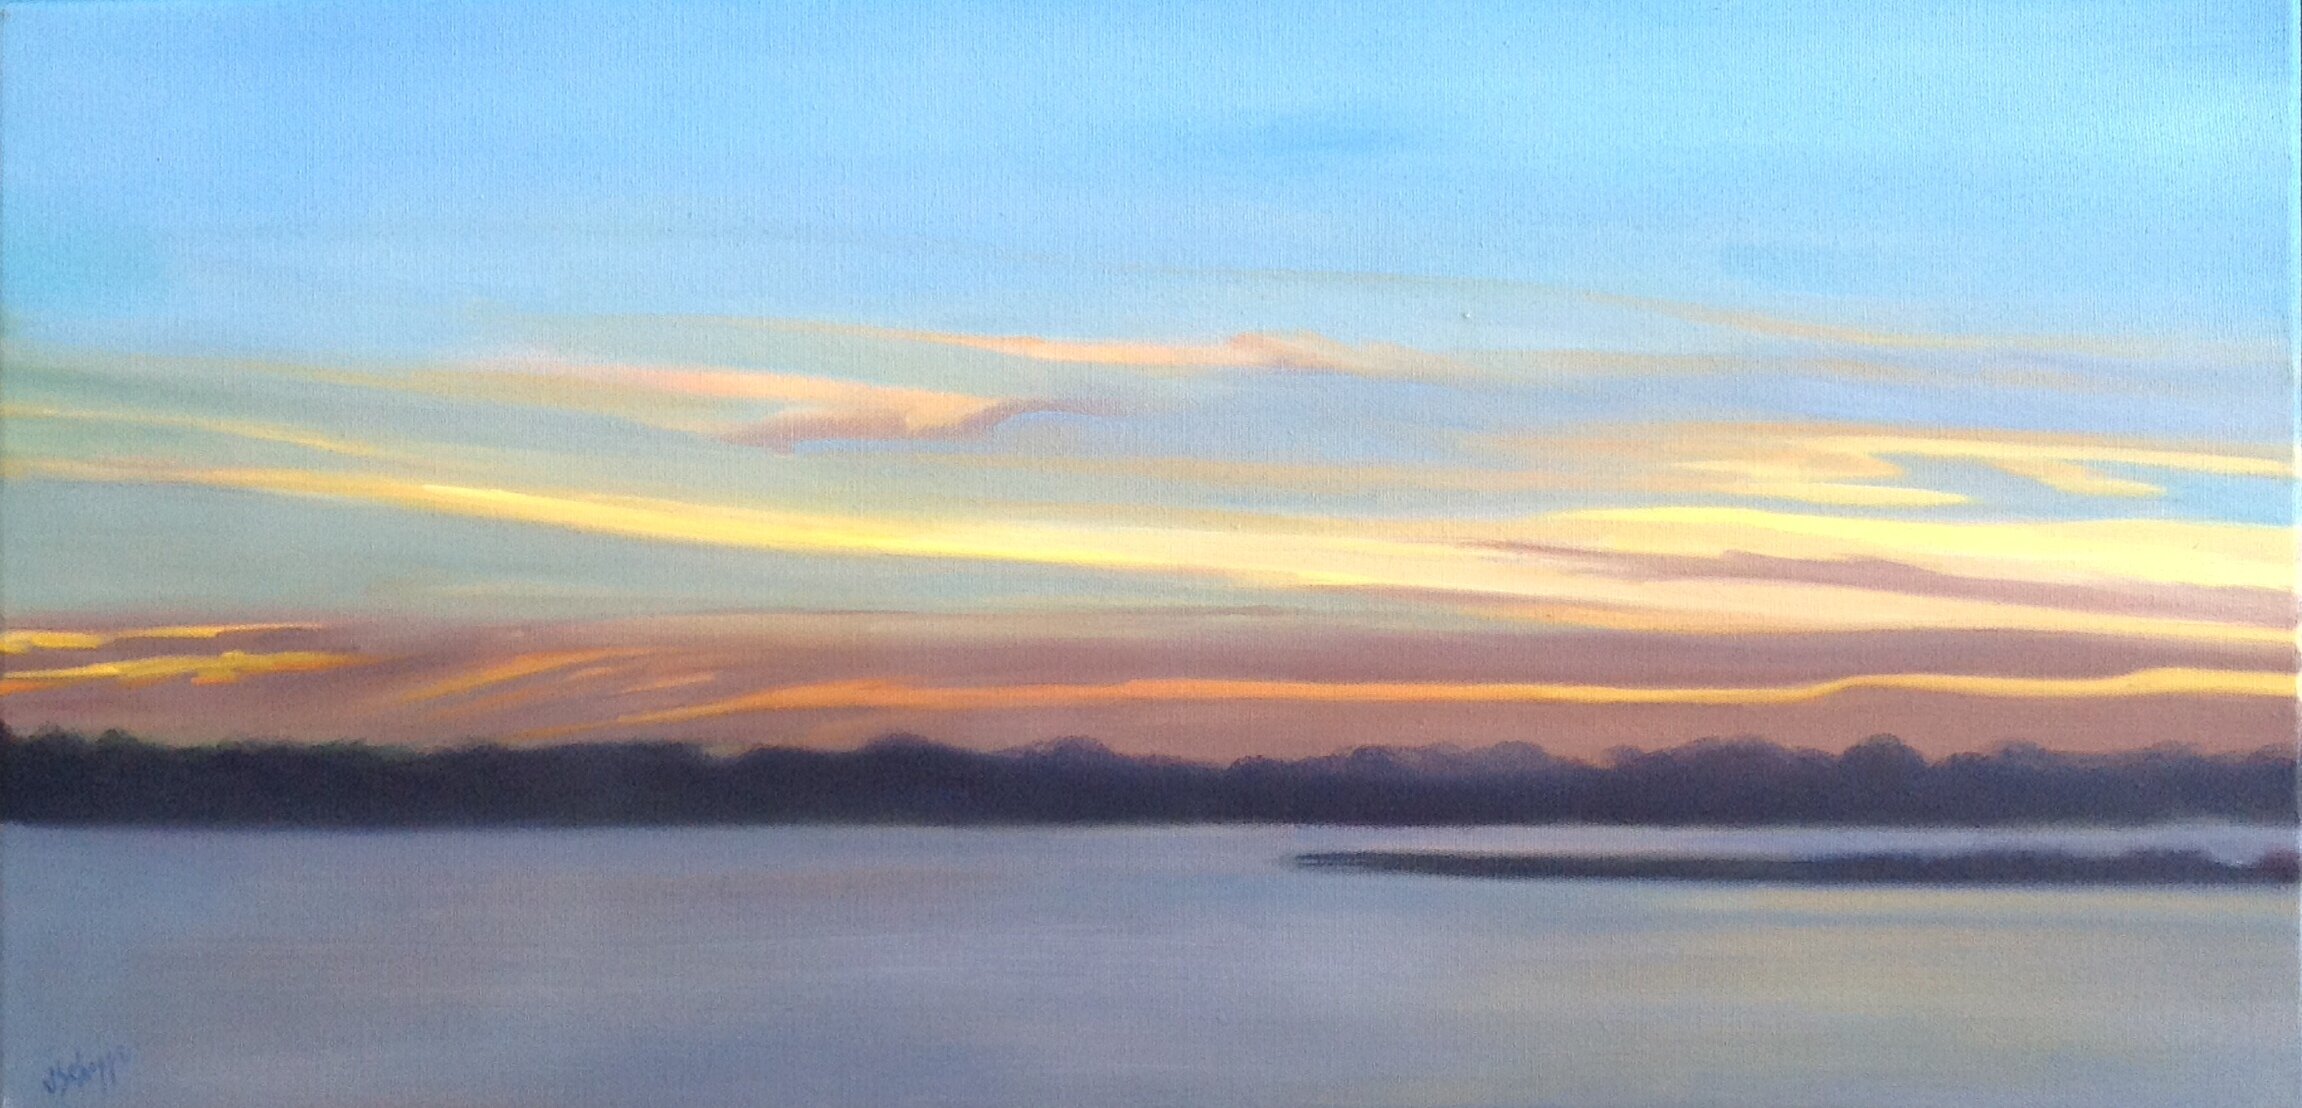 Last Light at Bend in the Road  10x20 Oil $650